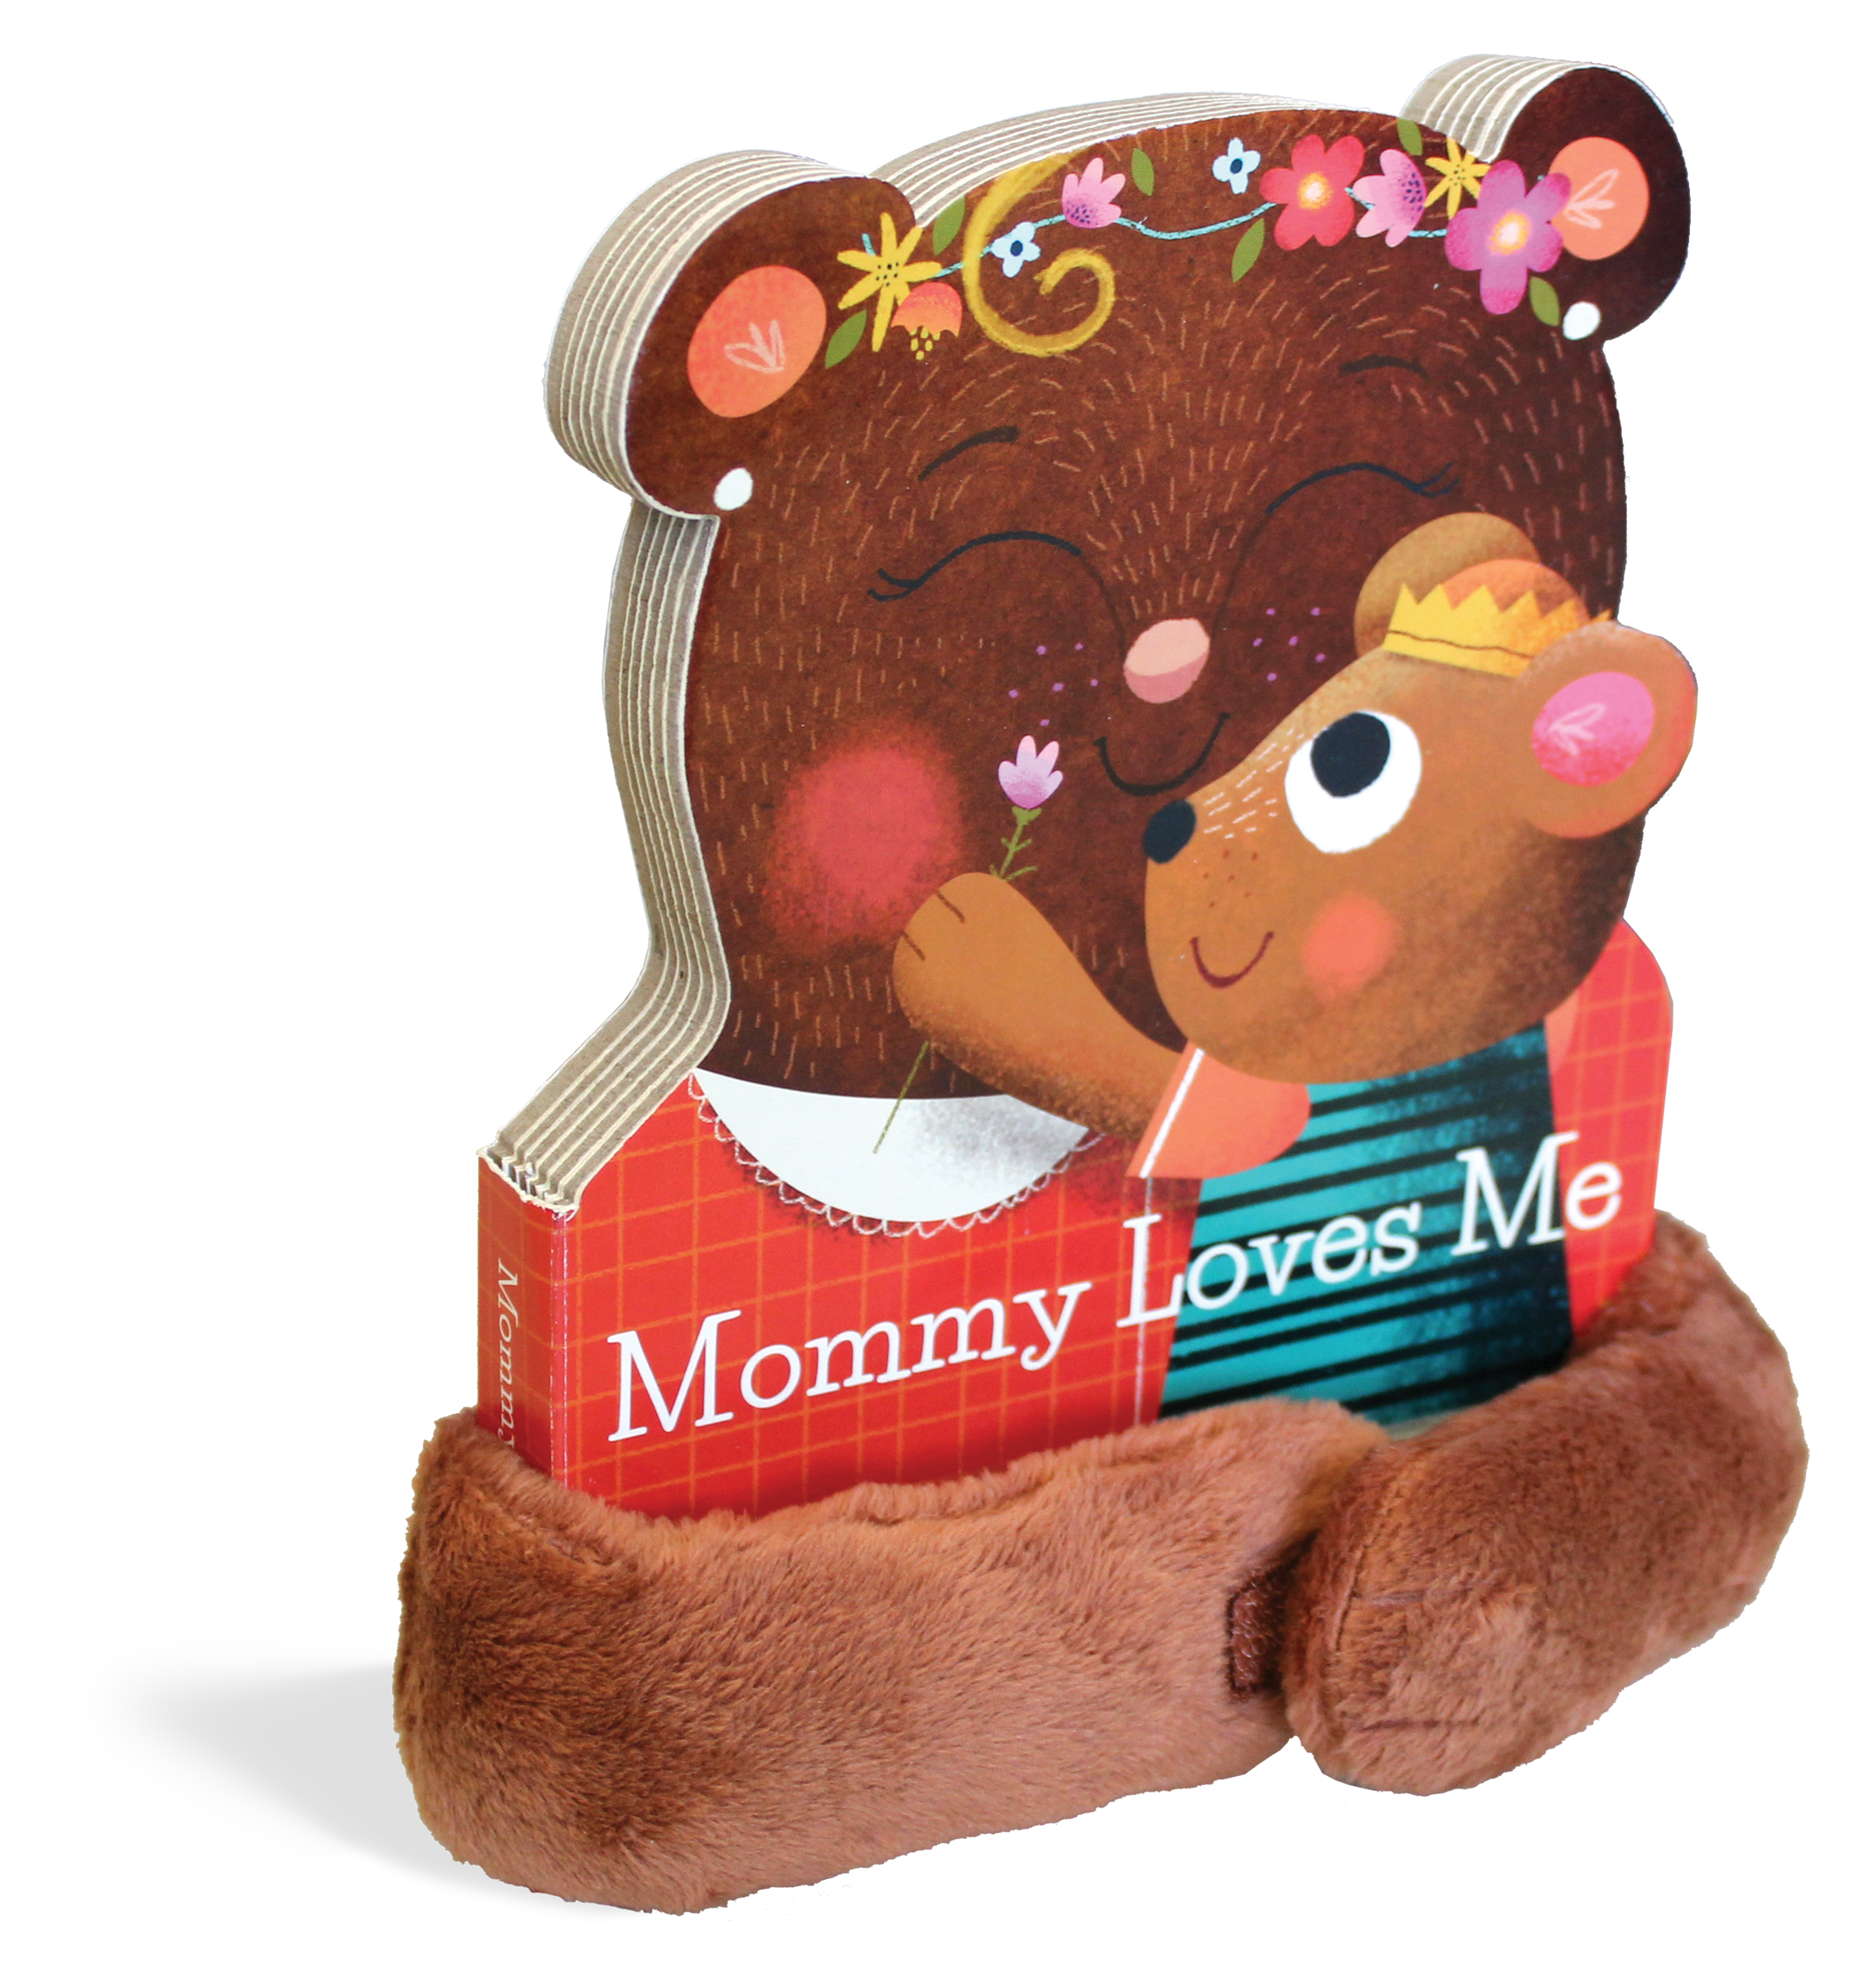 Mommy Loves Me Workman Publishing